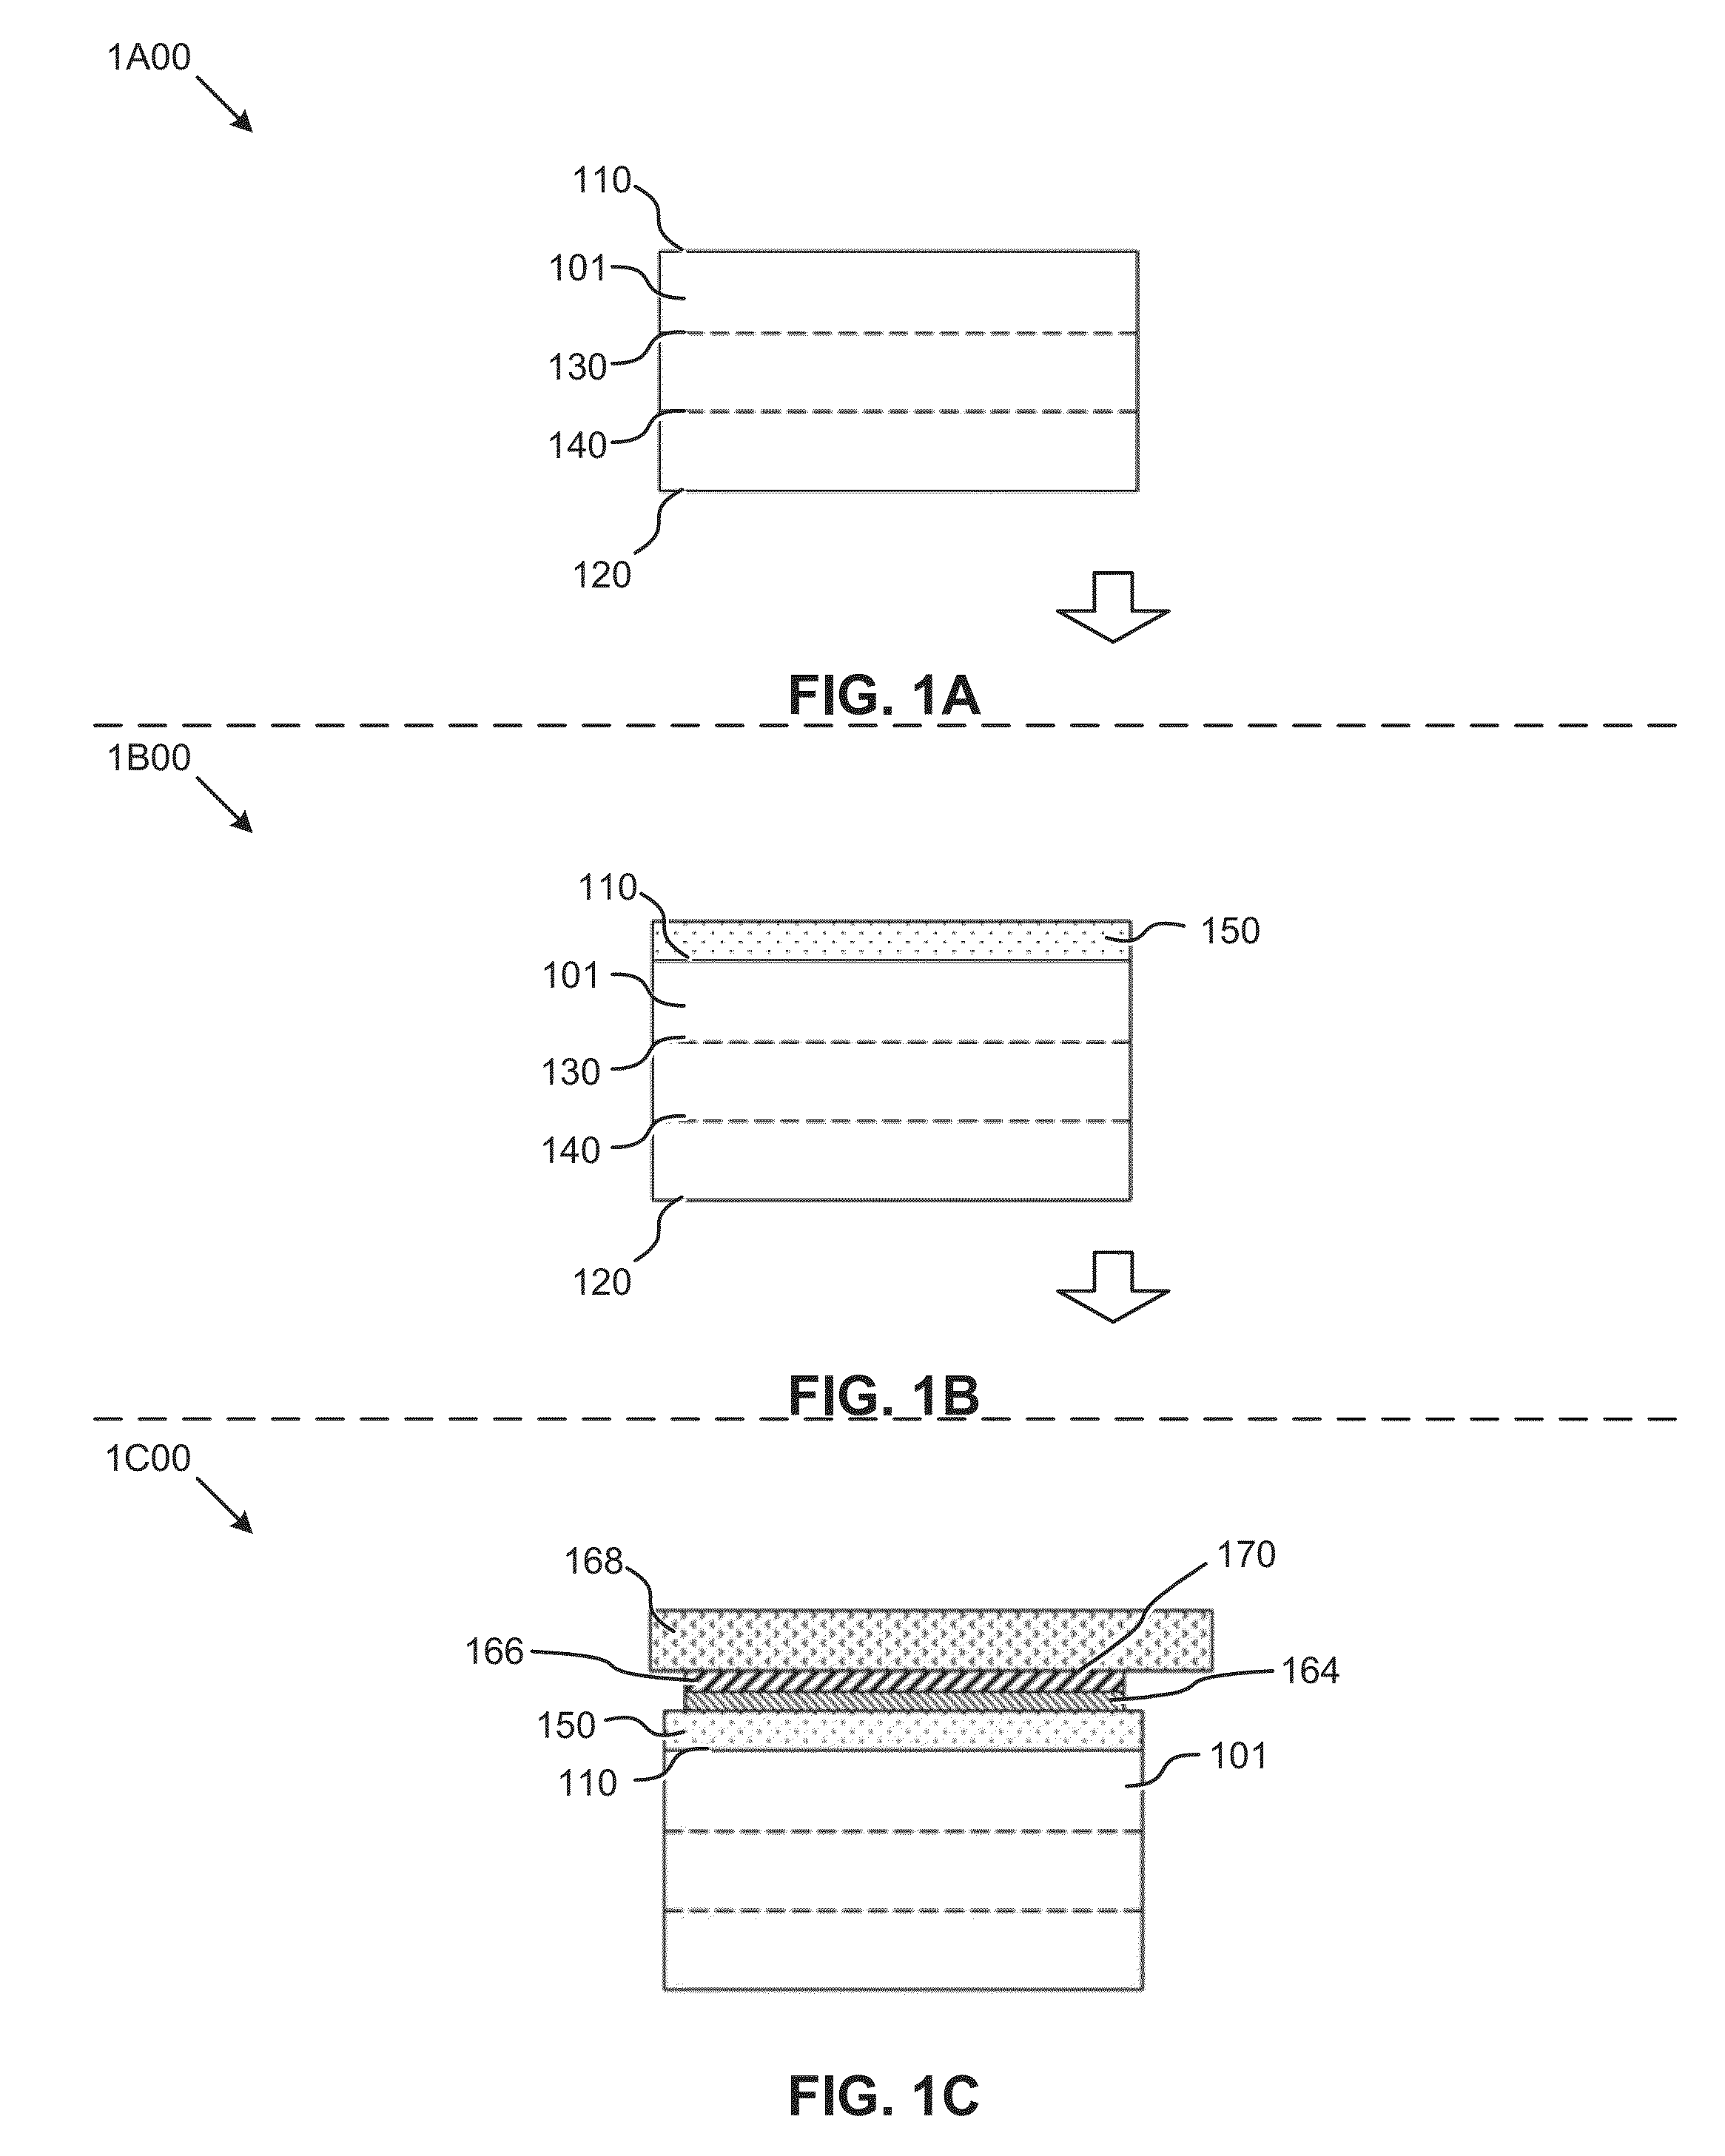 Reusable nitride wafer, method of making, and use thereof